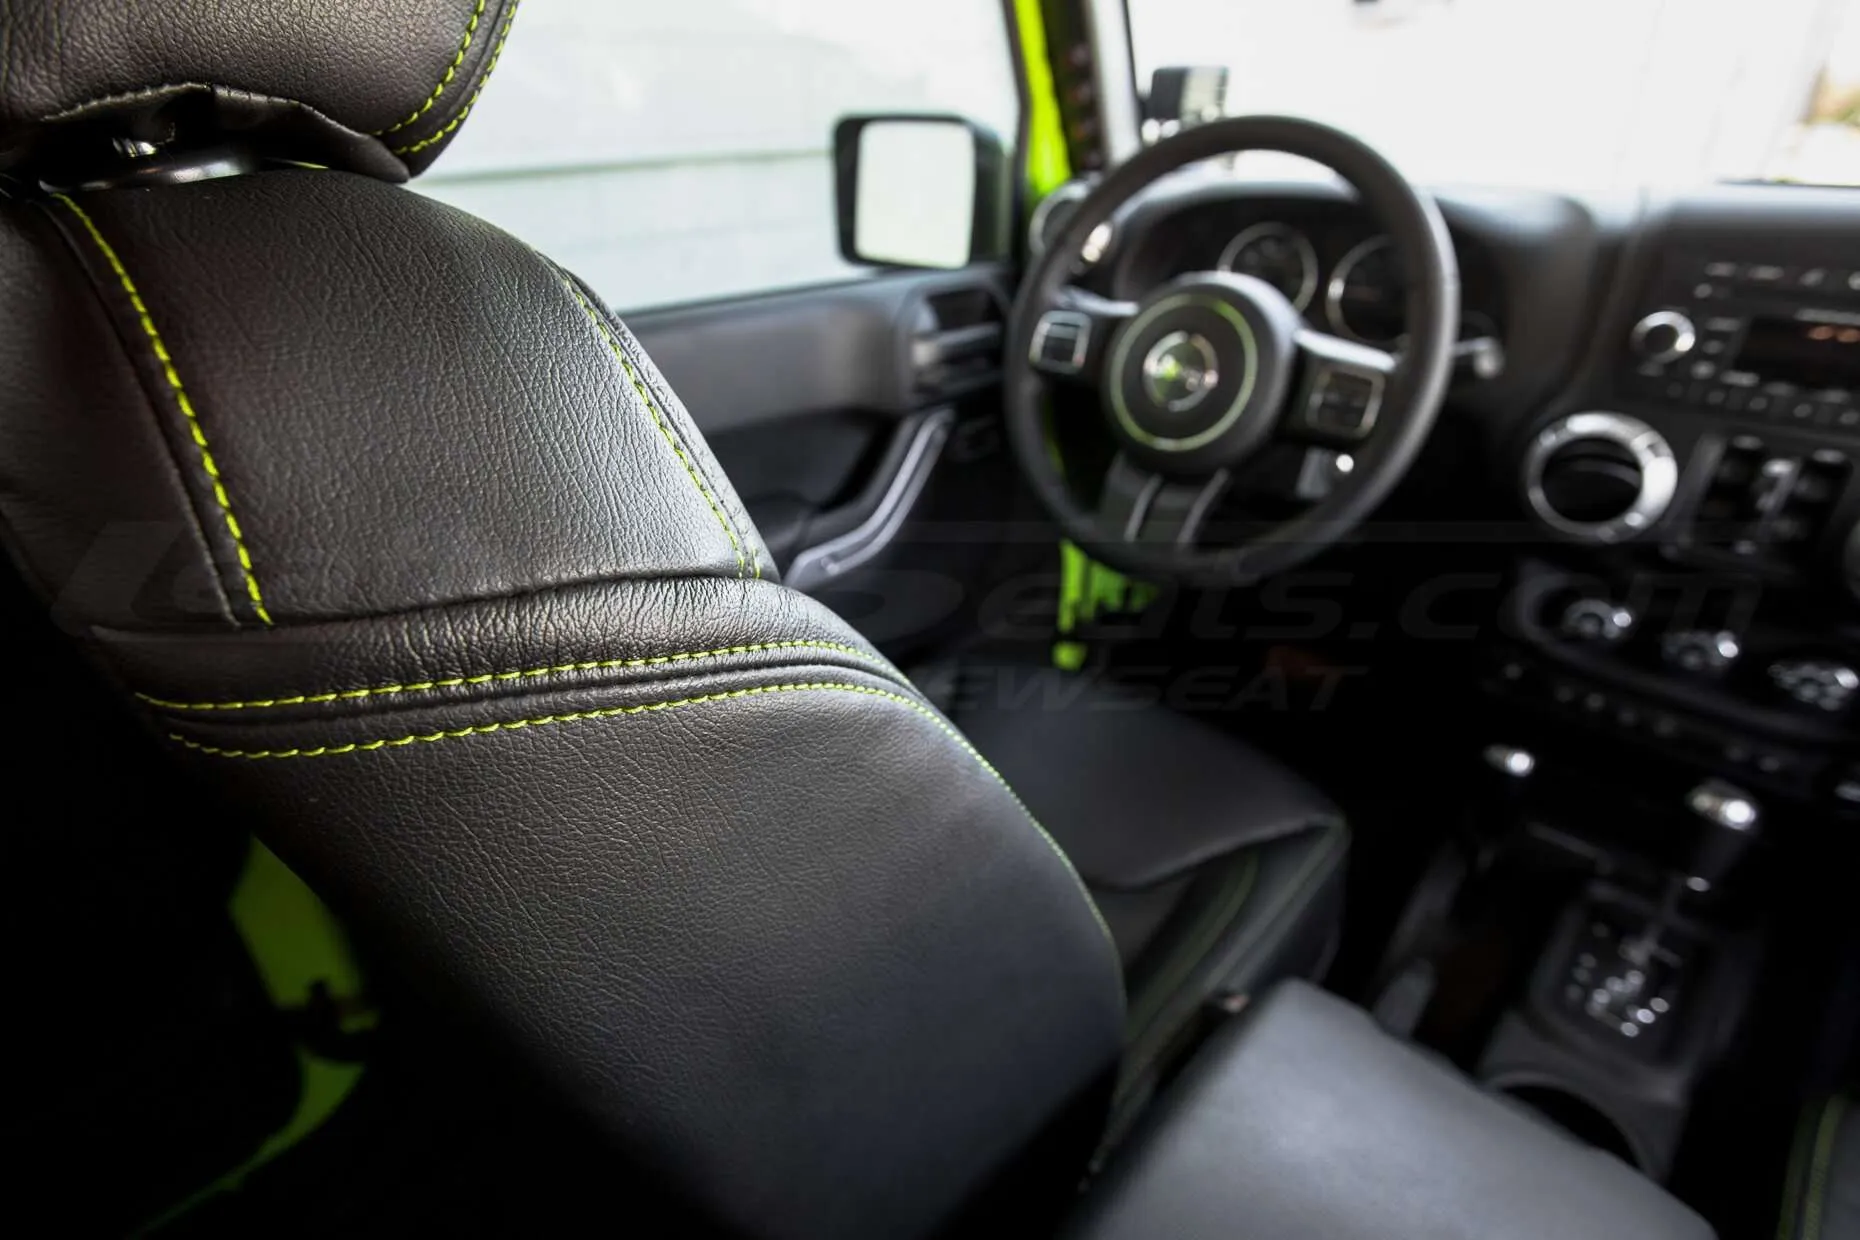 Jeep Wrangler Installed Leather Seats - Black & Piazza Green - Front backrest double-stitching